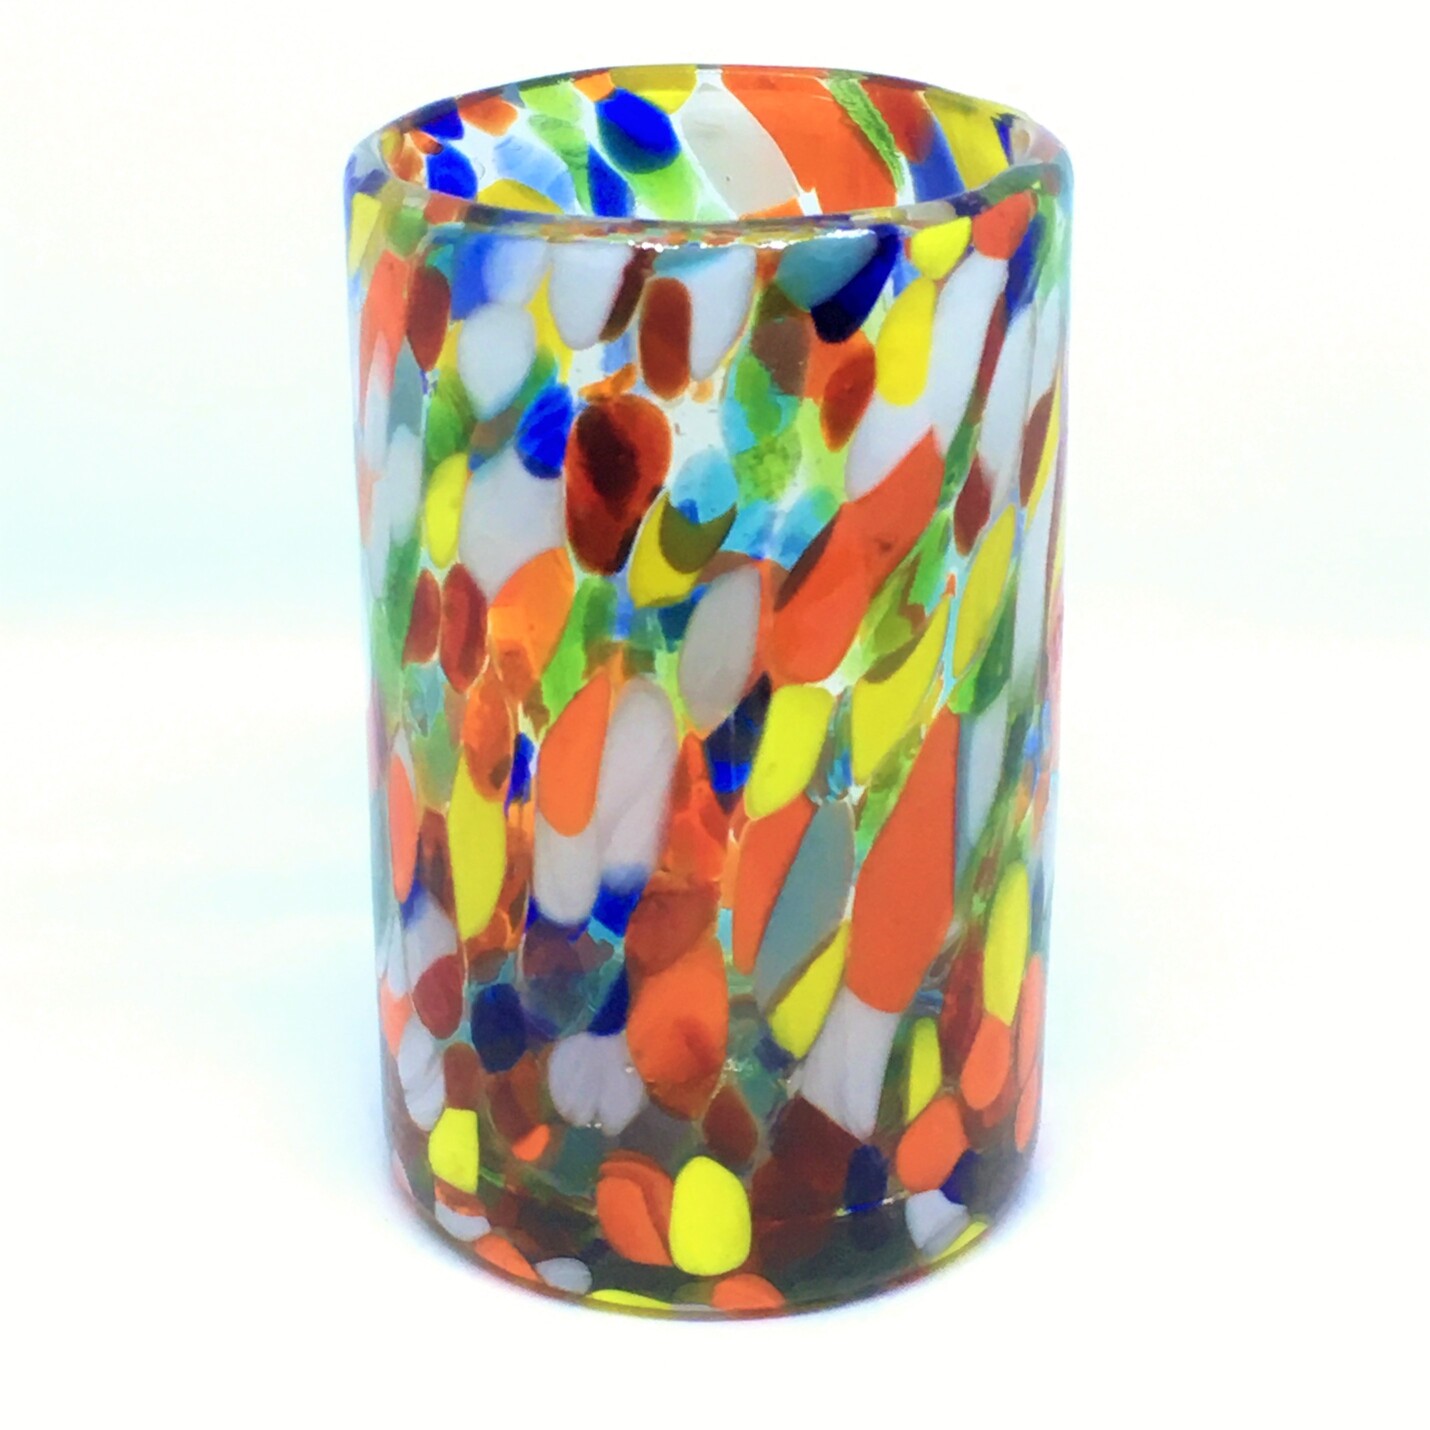 Confetti Glassware / Confetti Carnival drinking glasses (set of 6) / Let the spring come into your home with this colorful set of glasses. The multicolor glass decoration makes them a standout in any place.